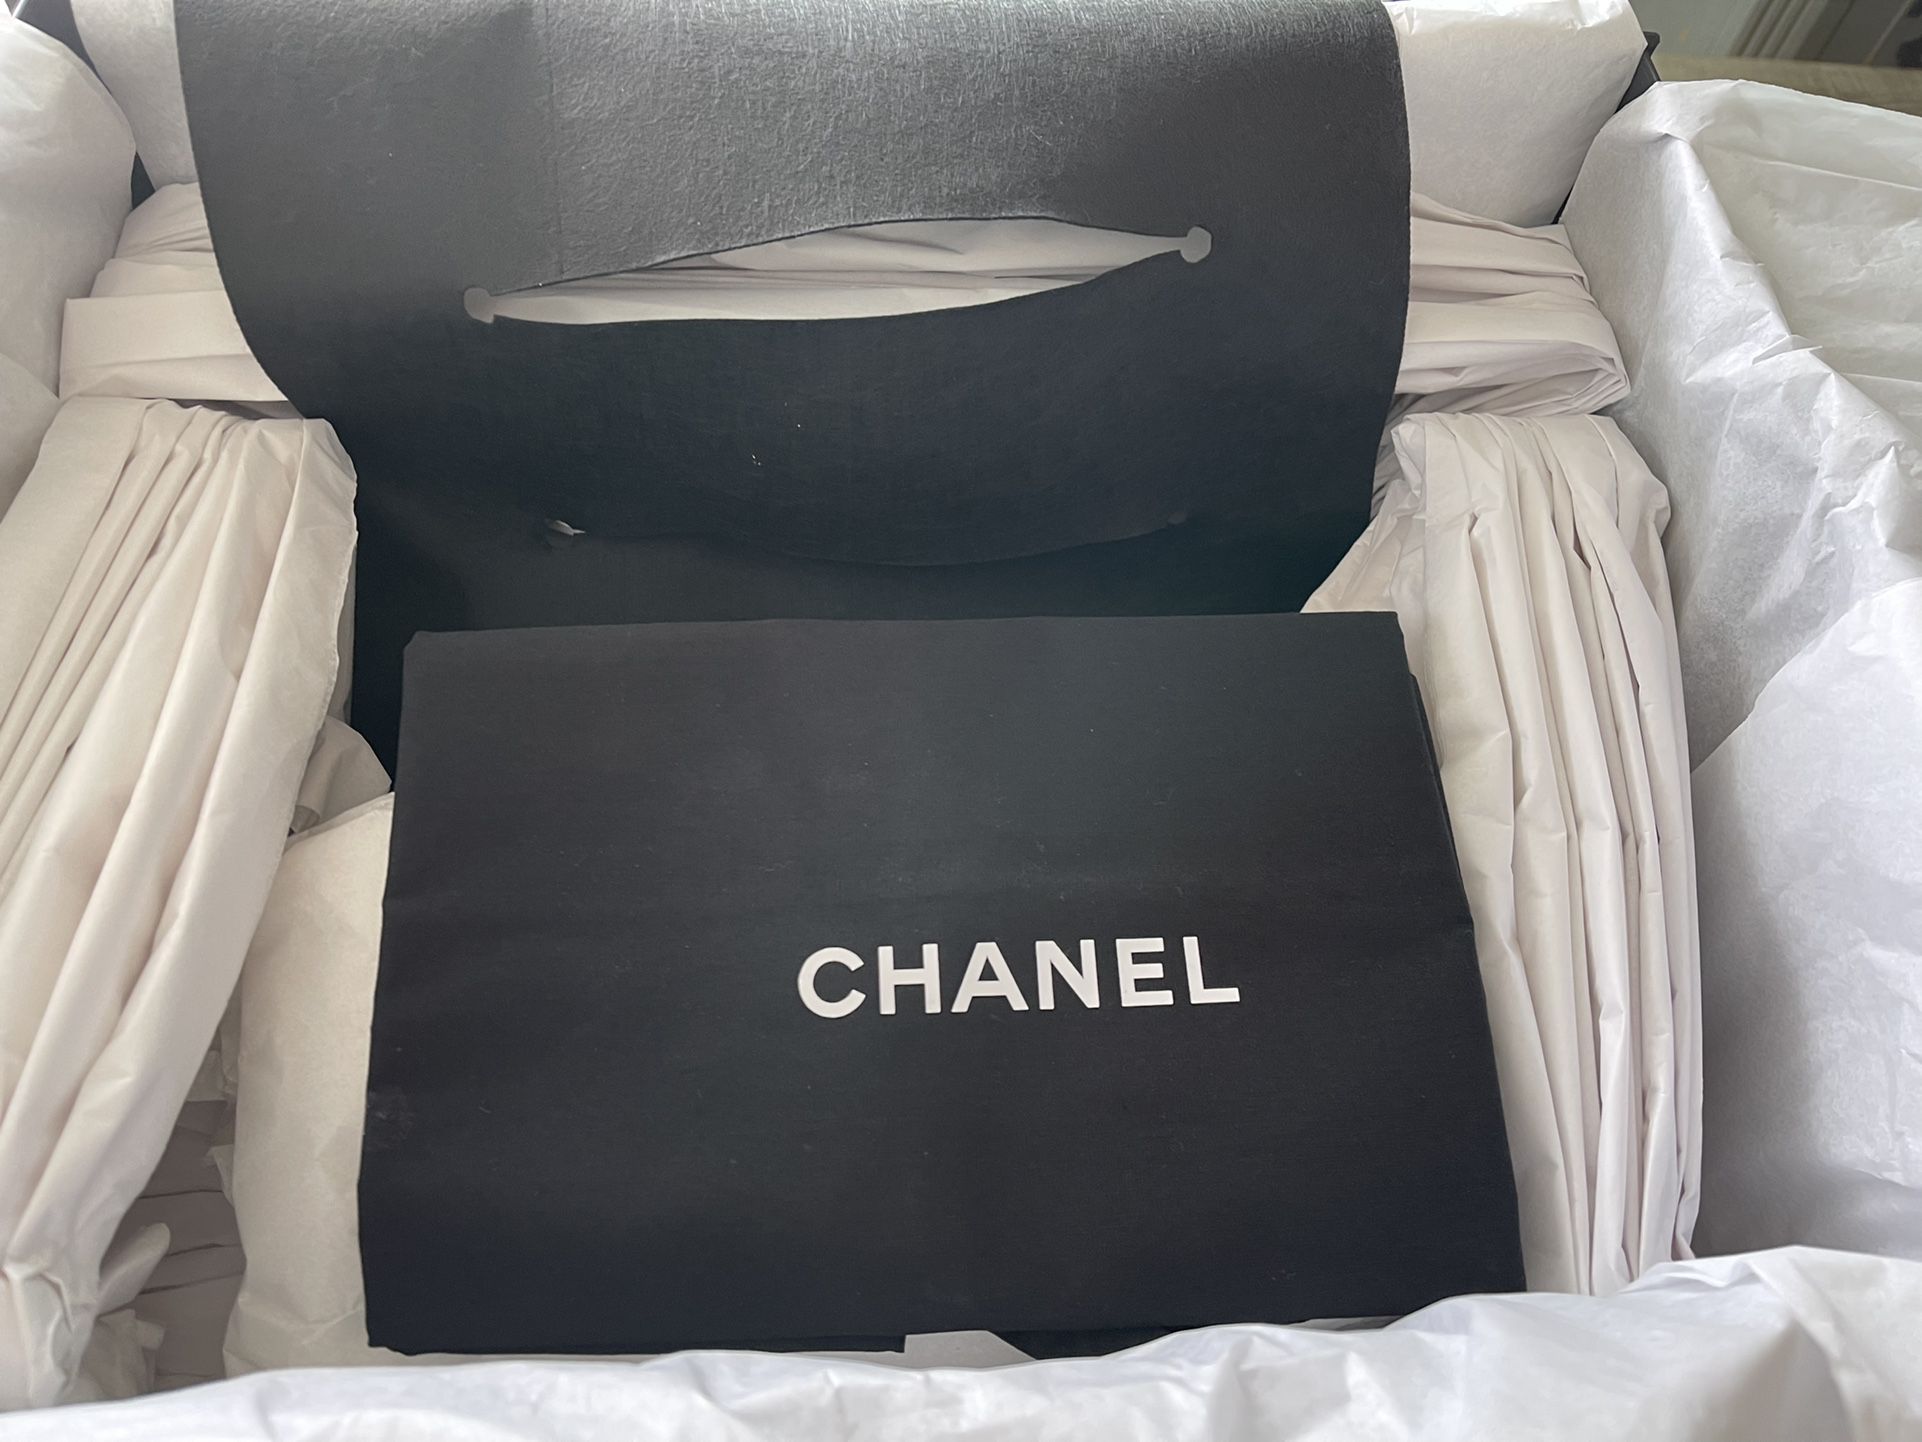 Authentic Chanel Business Affinity Large Tote for Sale in Honolulu